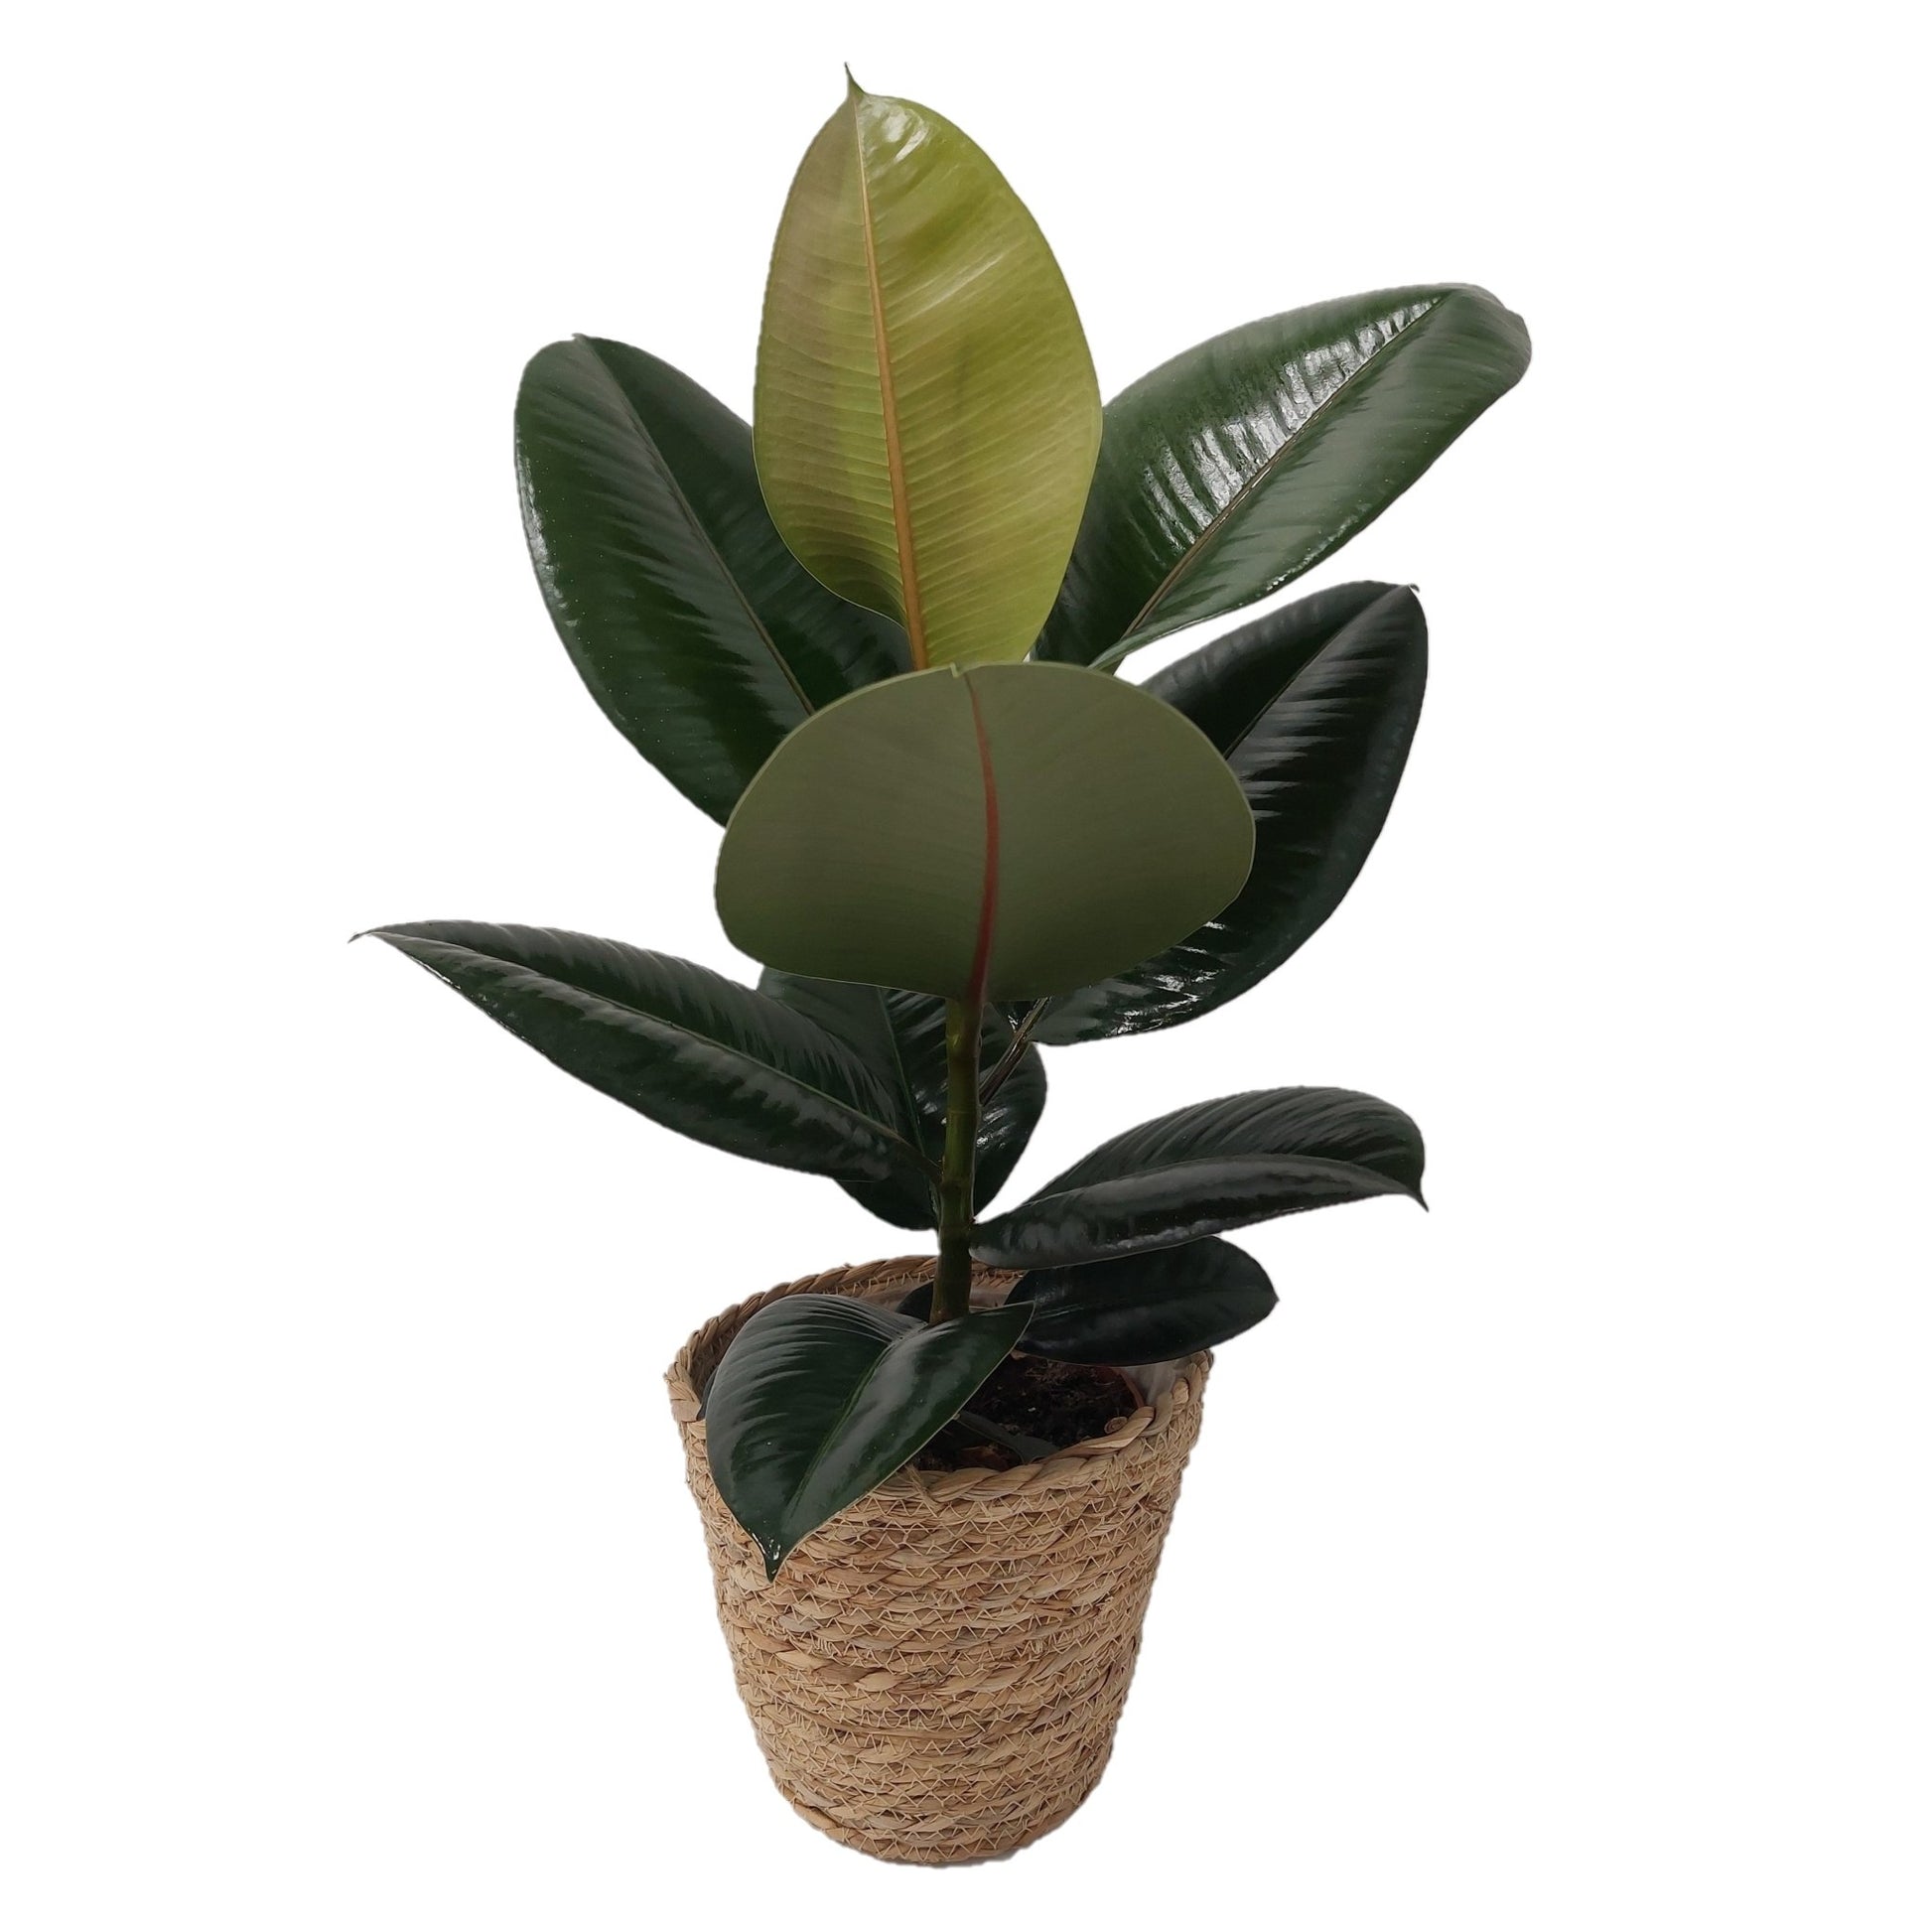 Ficus 17cm in Seagrass Basket Trolley - Green Plant The Horti House